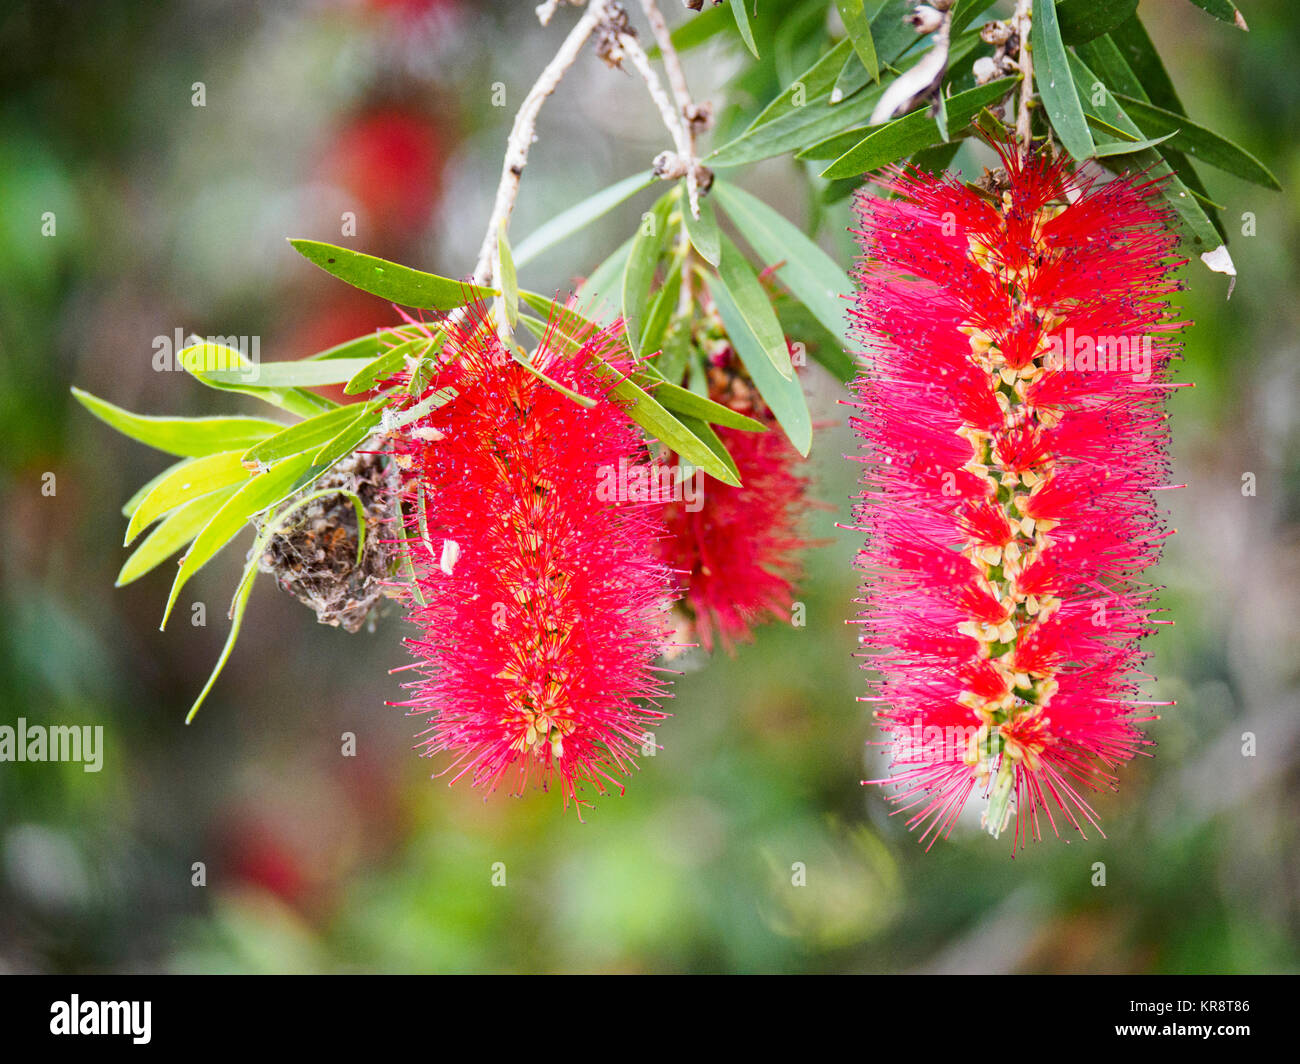 Australia, New South Wales, Red bottlebrushes hanging from twig Stock Photo